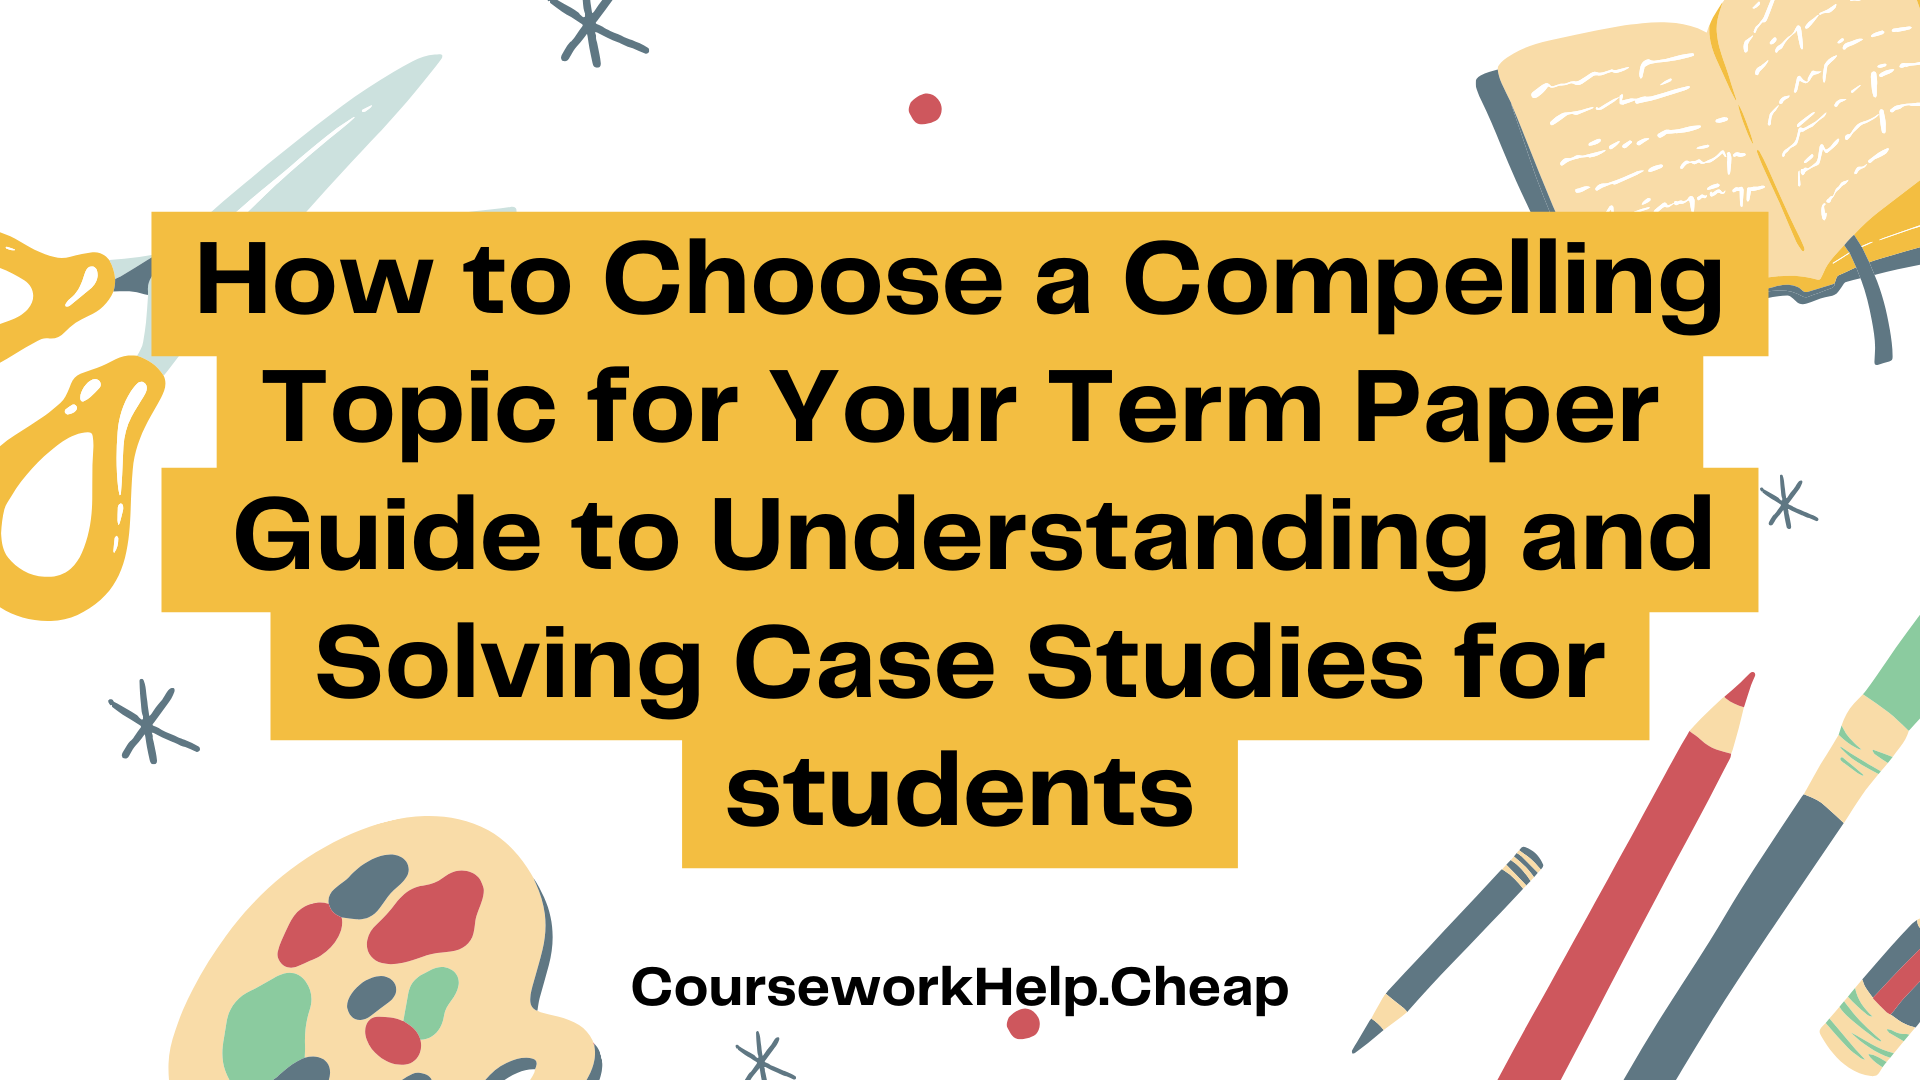 How to Choose a Compelling Topic for Your Term Paper